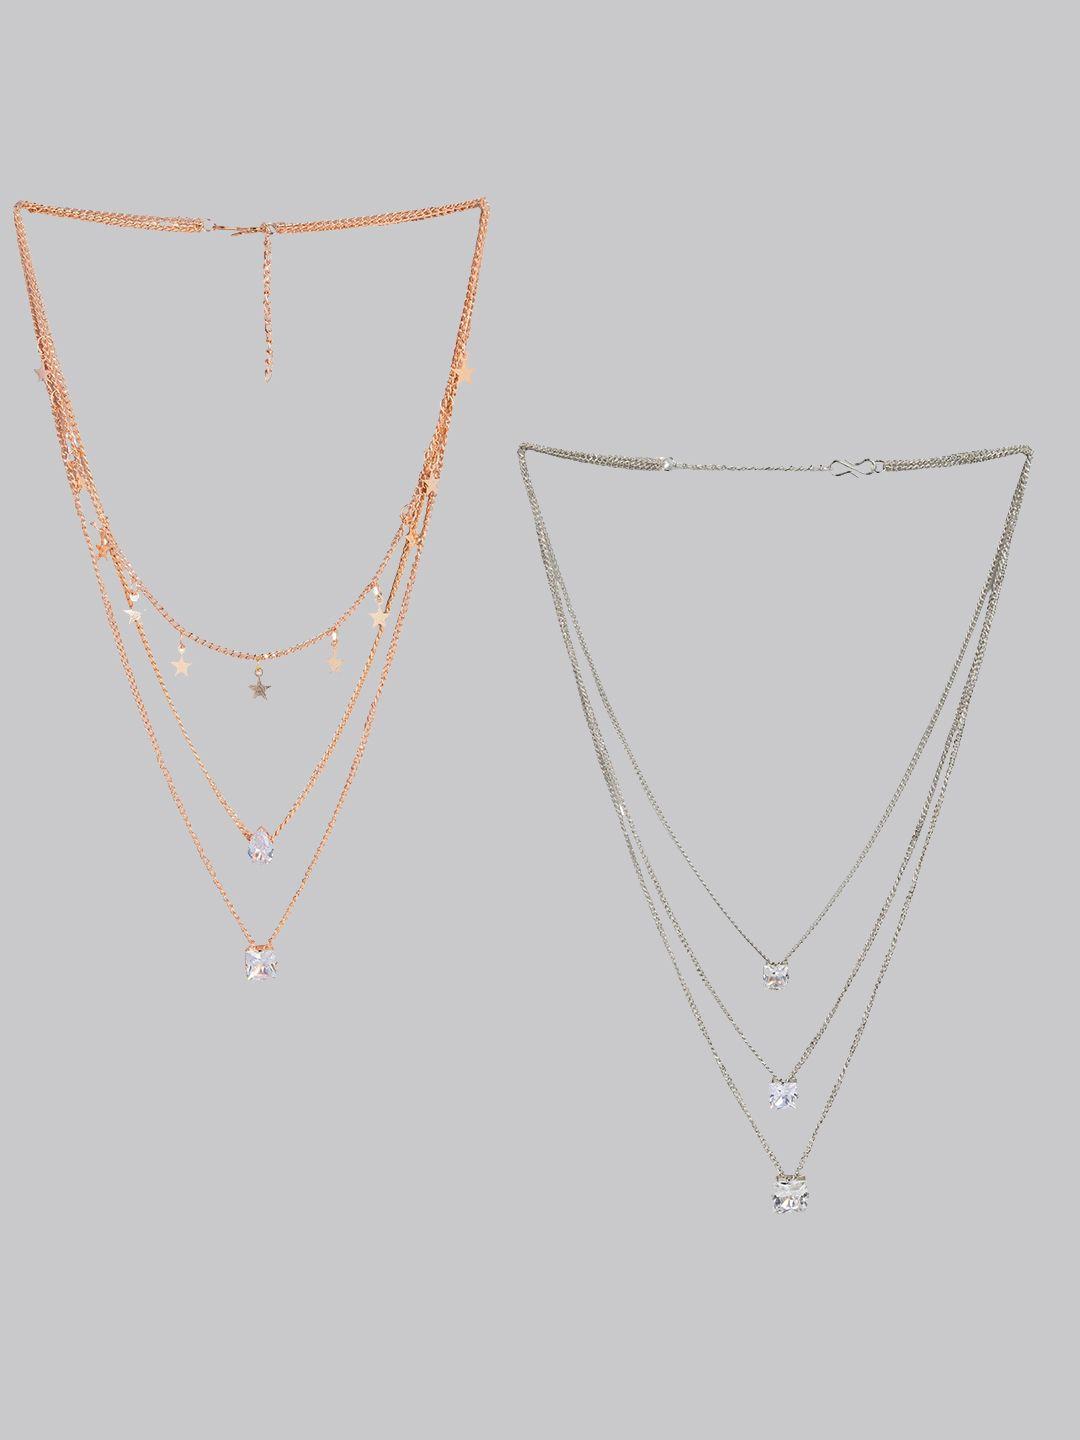 kord store set of 2 rose gold-plated cz studded 3 layered pendant with chain